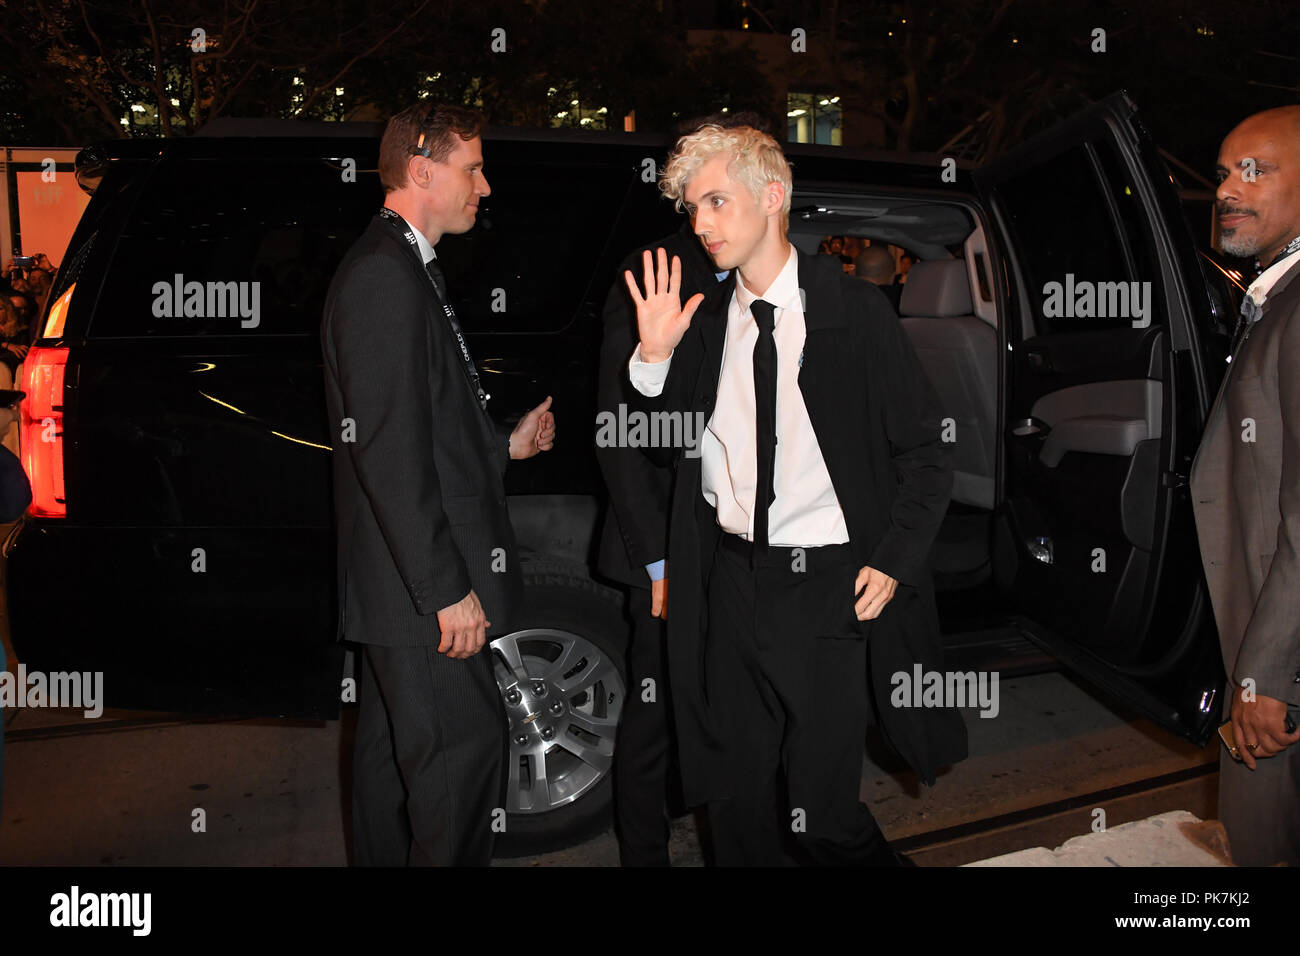 Toronto, Ontario, Canada. 11th Sep, 2018. TROYE SIVAN attends 'Boy Erased' premiere during the 2018 Toronto International Film Festival at Princess of Wales Theatre on September 11, 2018 in Toronto, Canada Credit: Igor Vidyashev/ZUMA Wire/Alamy Live News Stock Photo